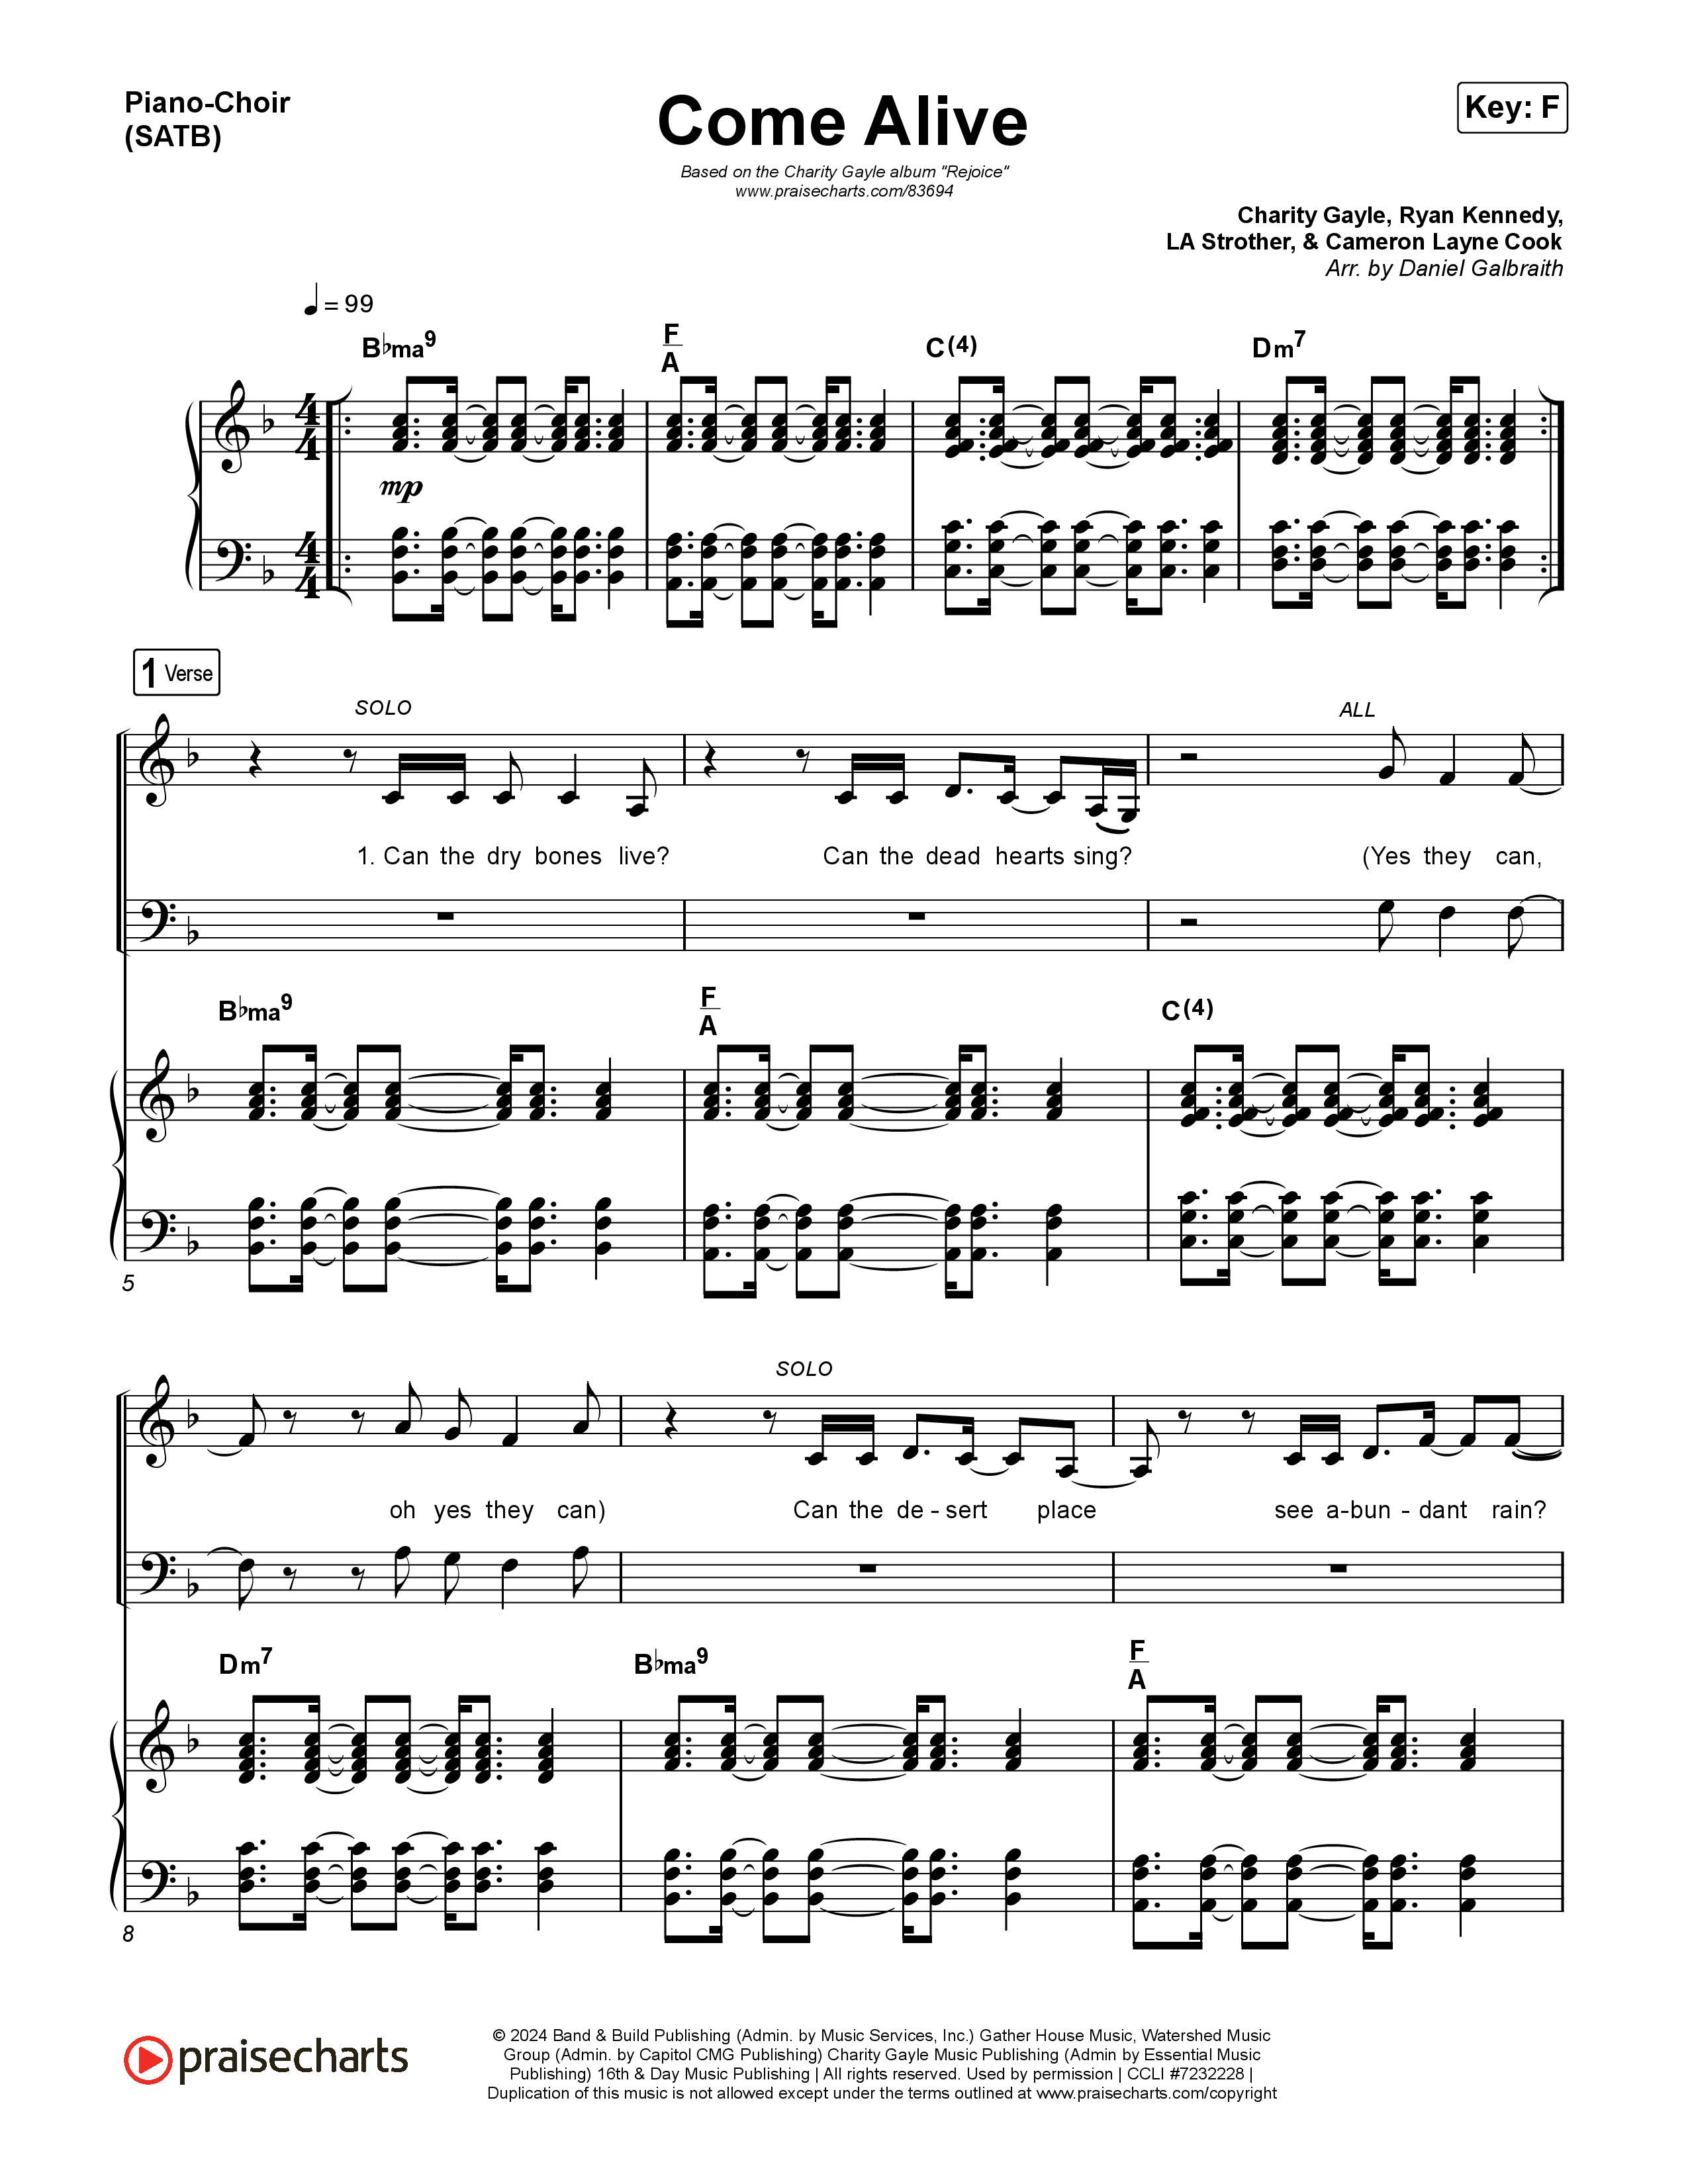 Come Alive Piano/Vocal (SATB) (Charity Gayle)